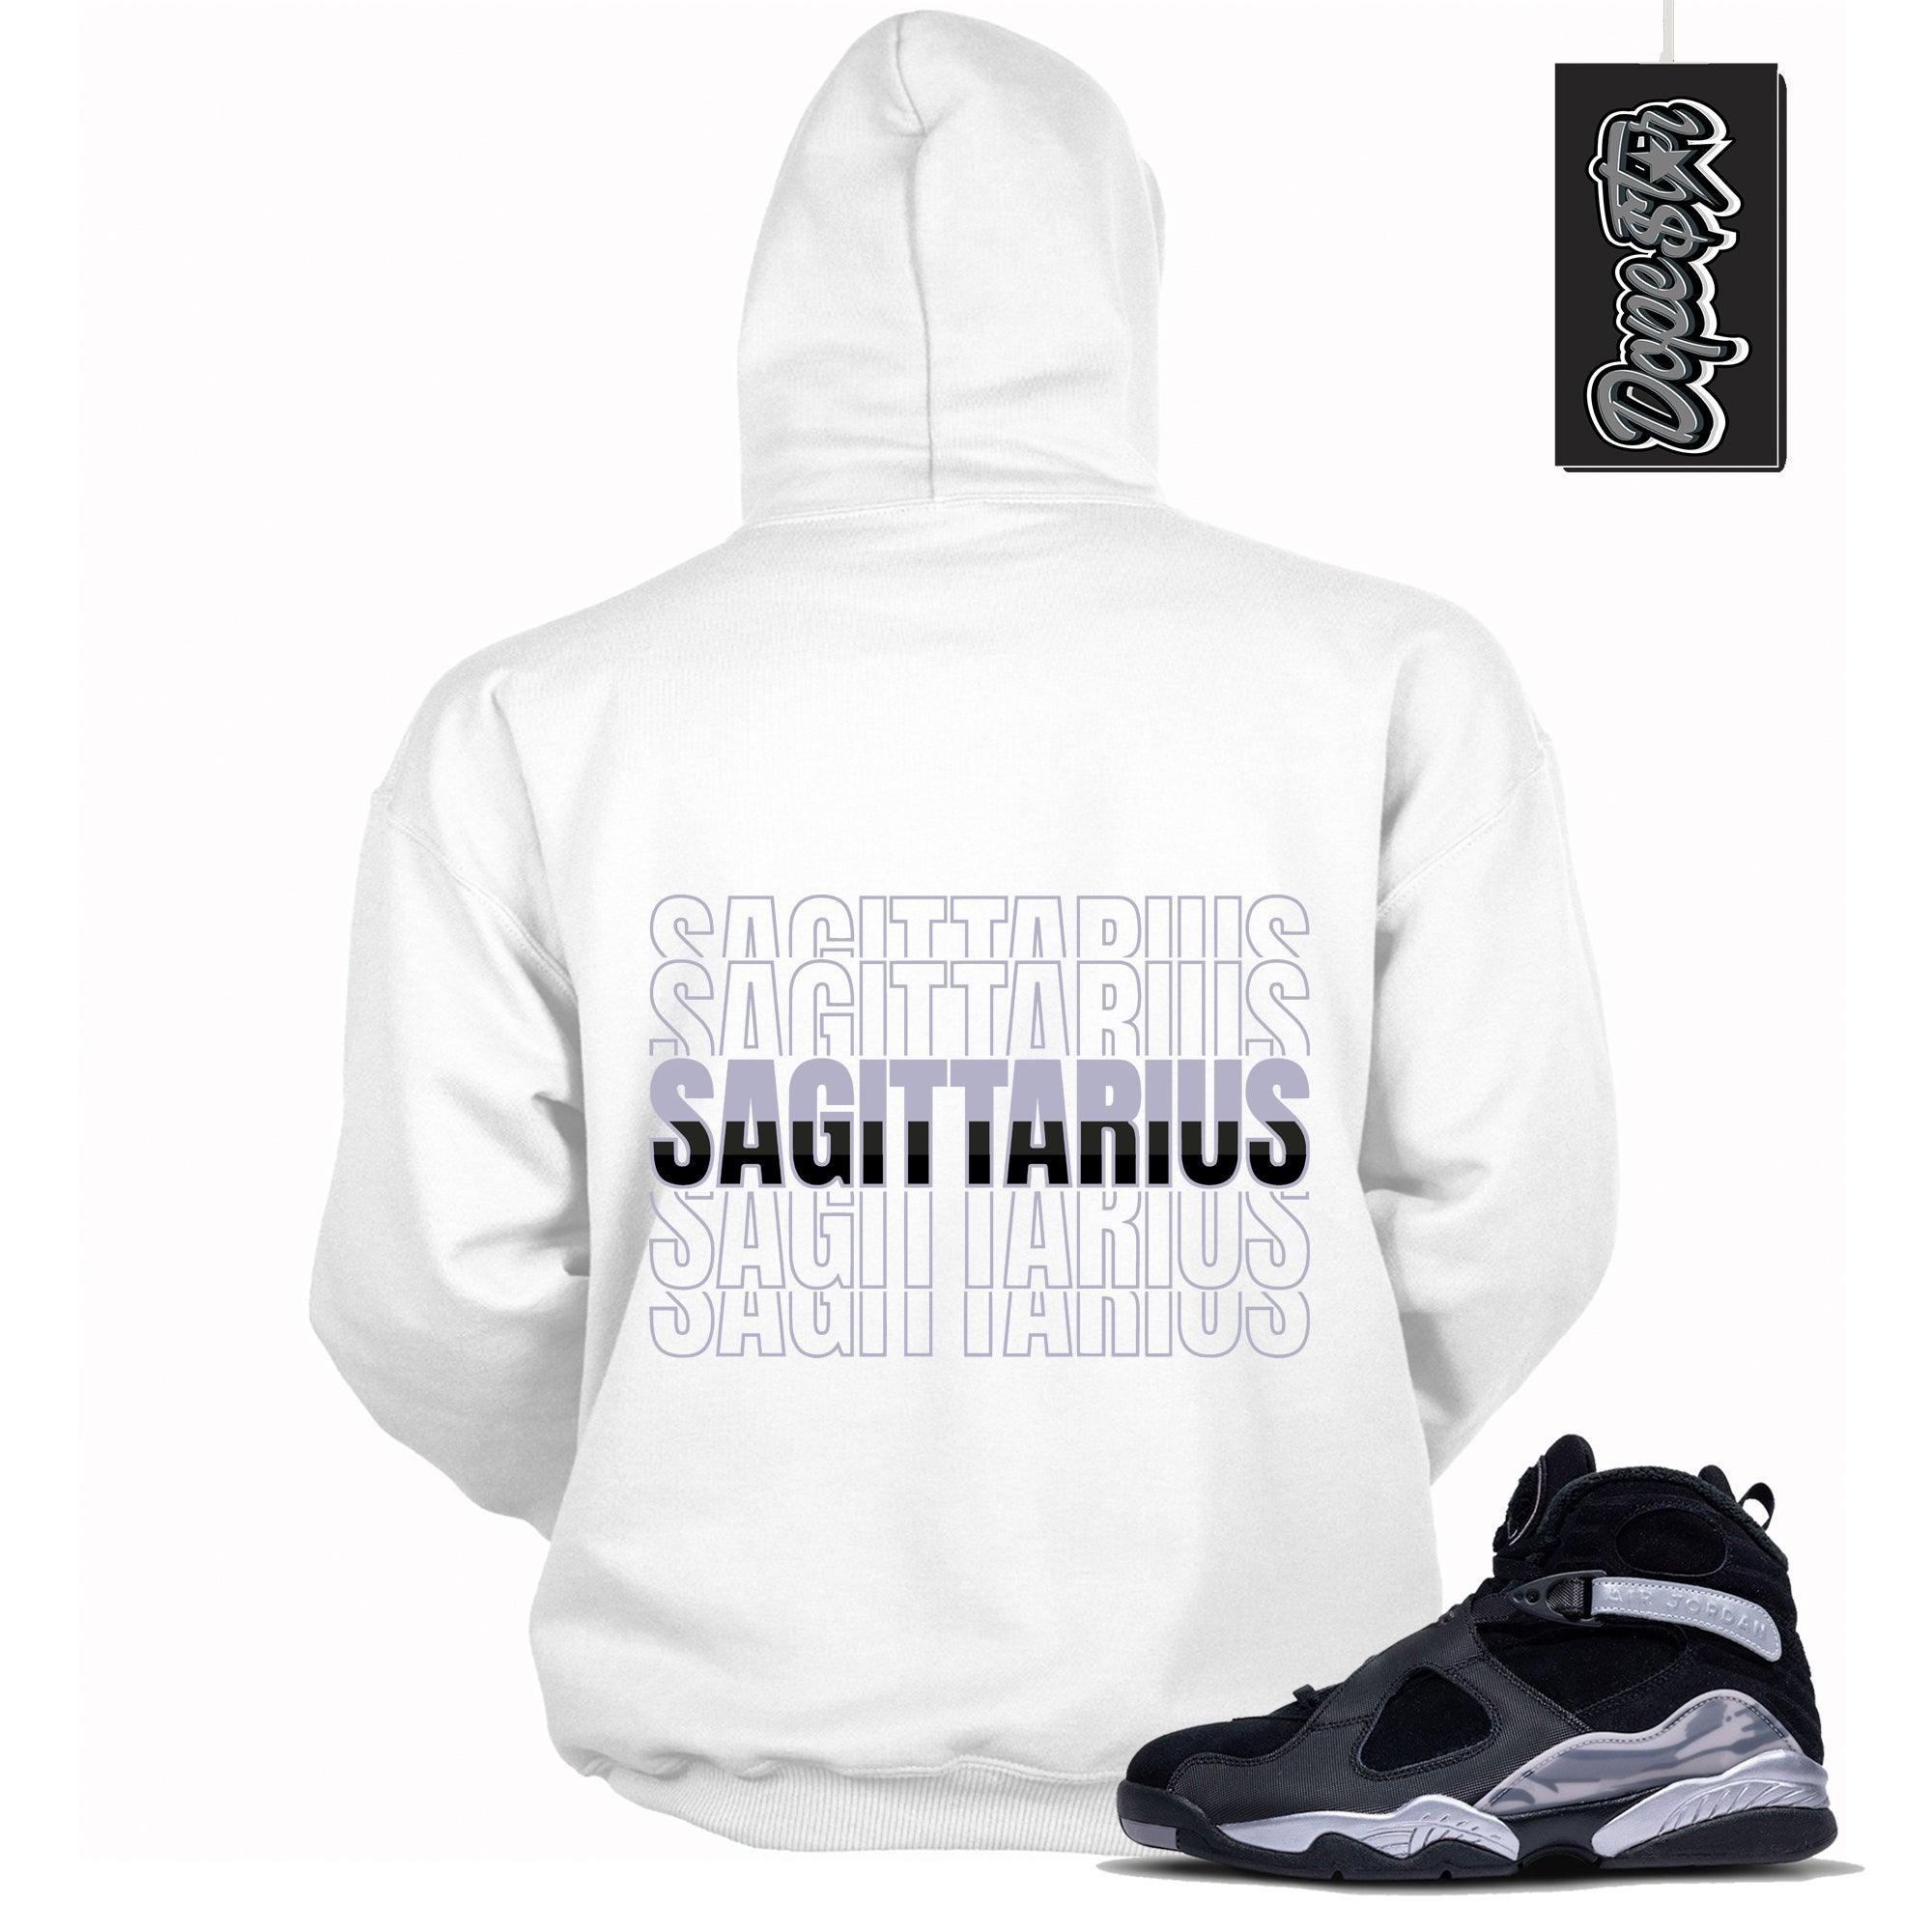 Cool White Graphic Hoodie with “ Sagittarius “ print, that perfectly matches Air Jordan 8 Winterized  sneakers